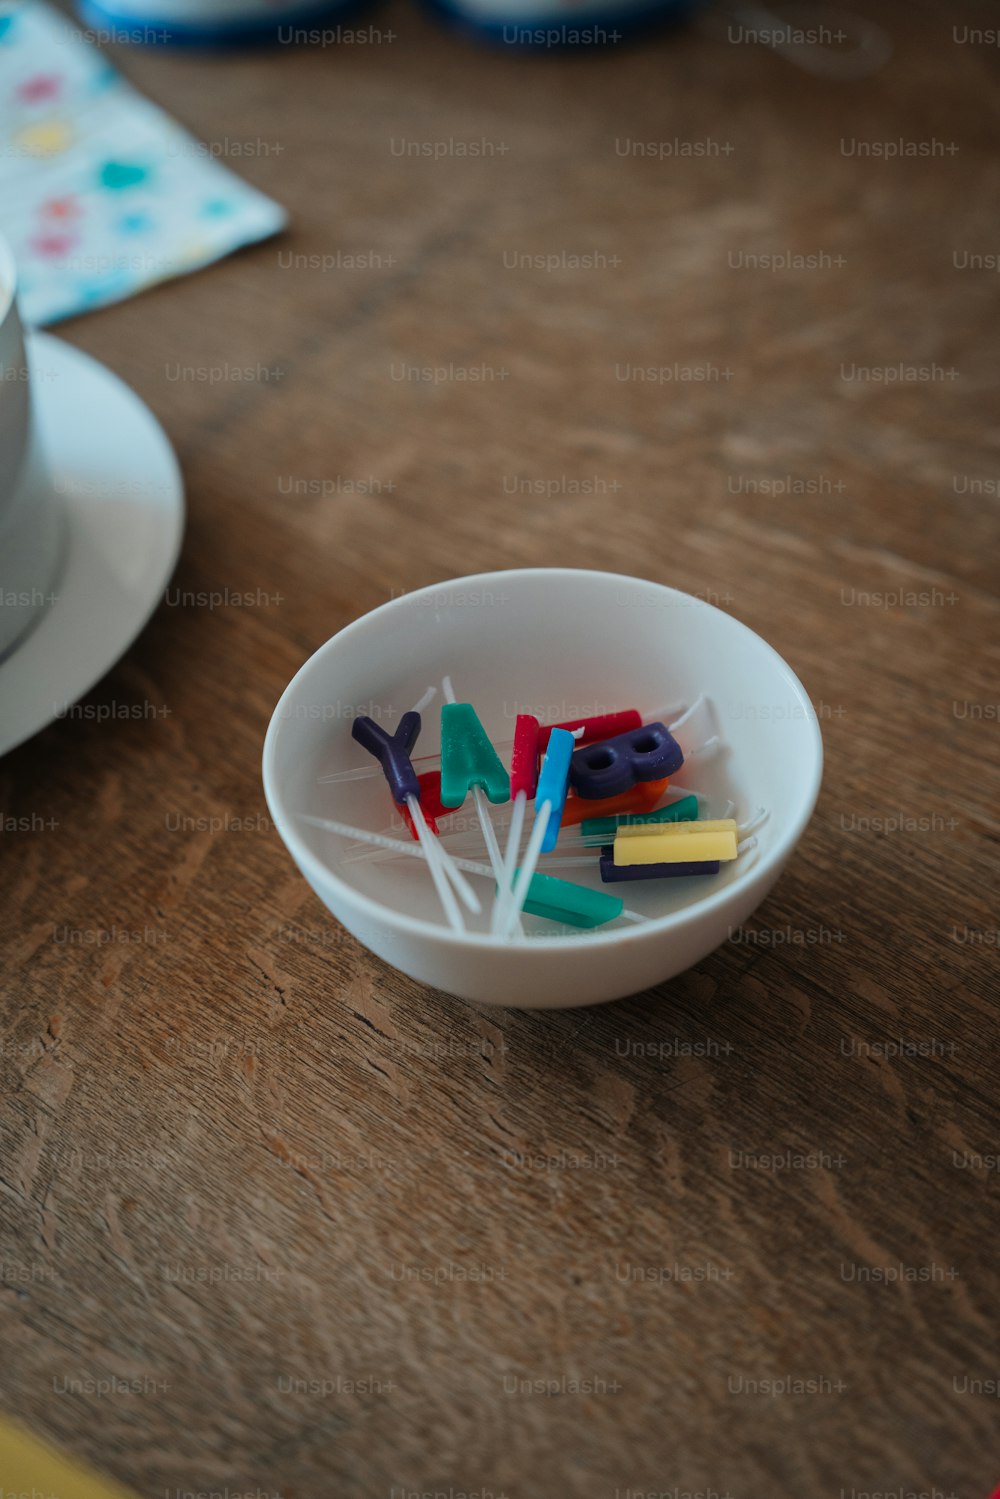 a bowl of toothbrushes sitting on a table